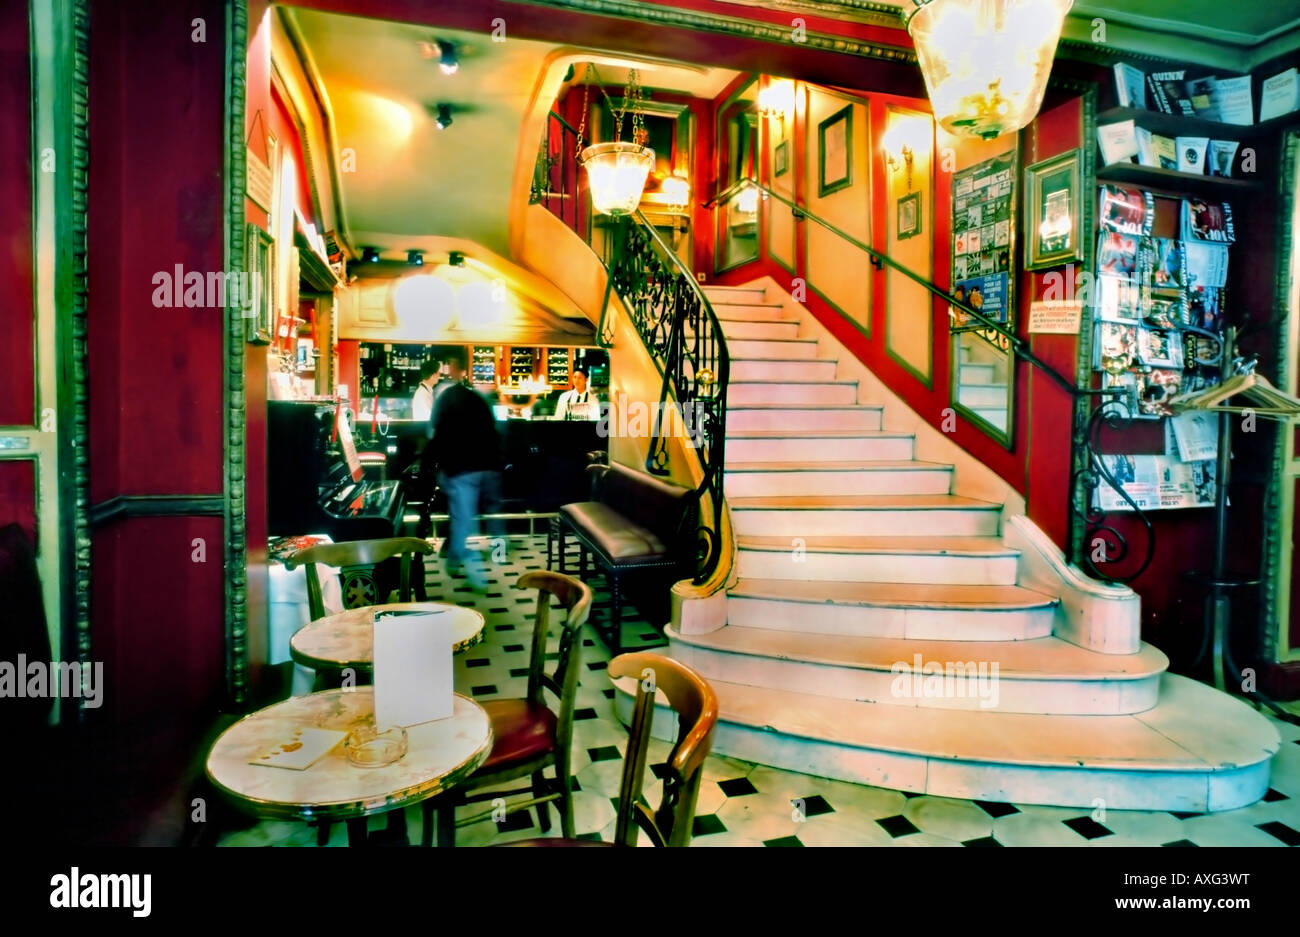 Paris France, 'Le Procope Cafe' stairs Interior 'Marble Staircase' and View to Bar, Paris coffee shop old restaurant interior Stock Photo